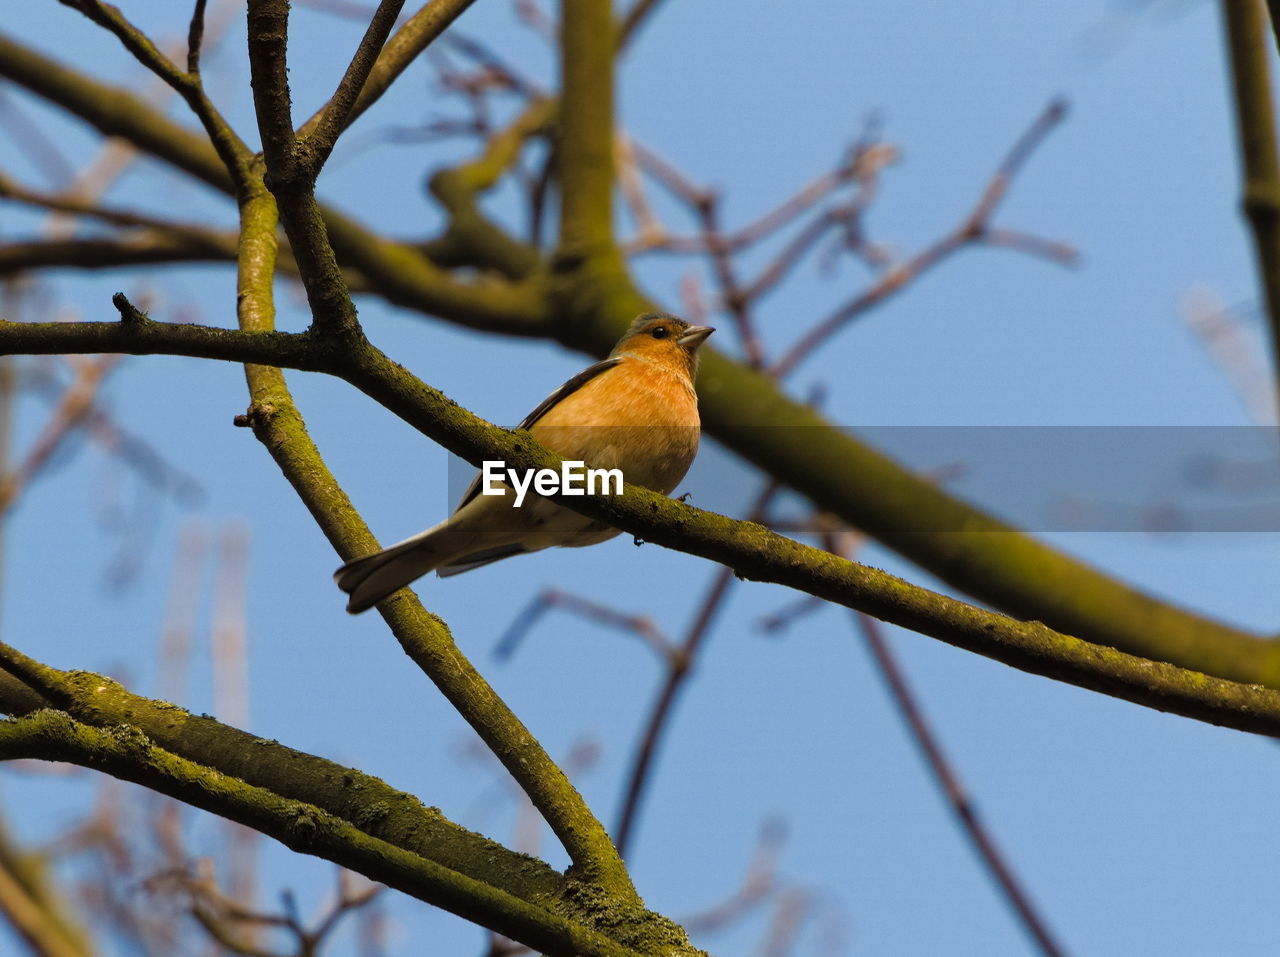 The common chaffinch fringilla coelebs. chaffinch on a branch. small song bird on a branch.